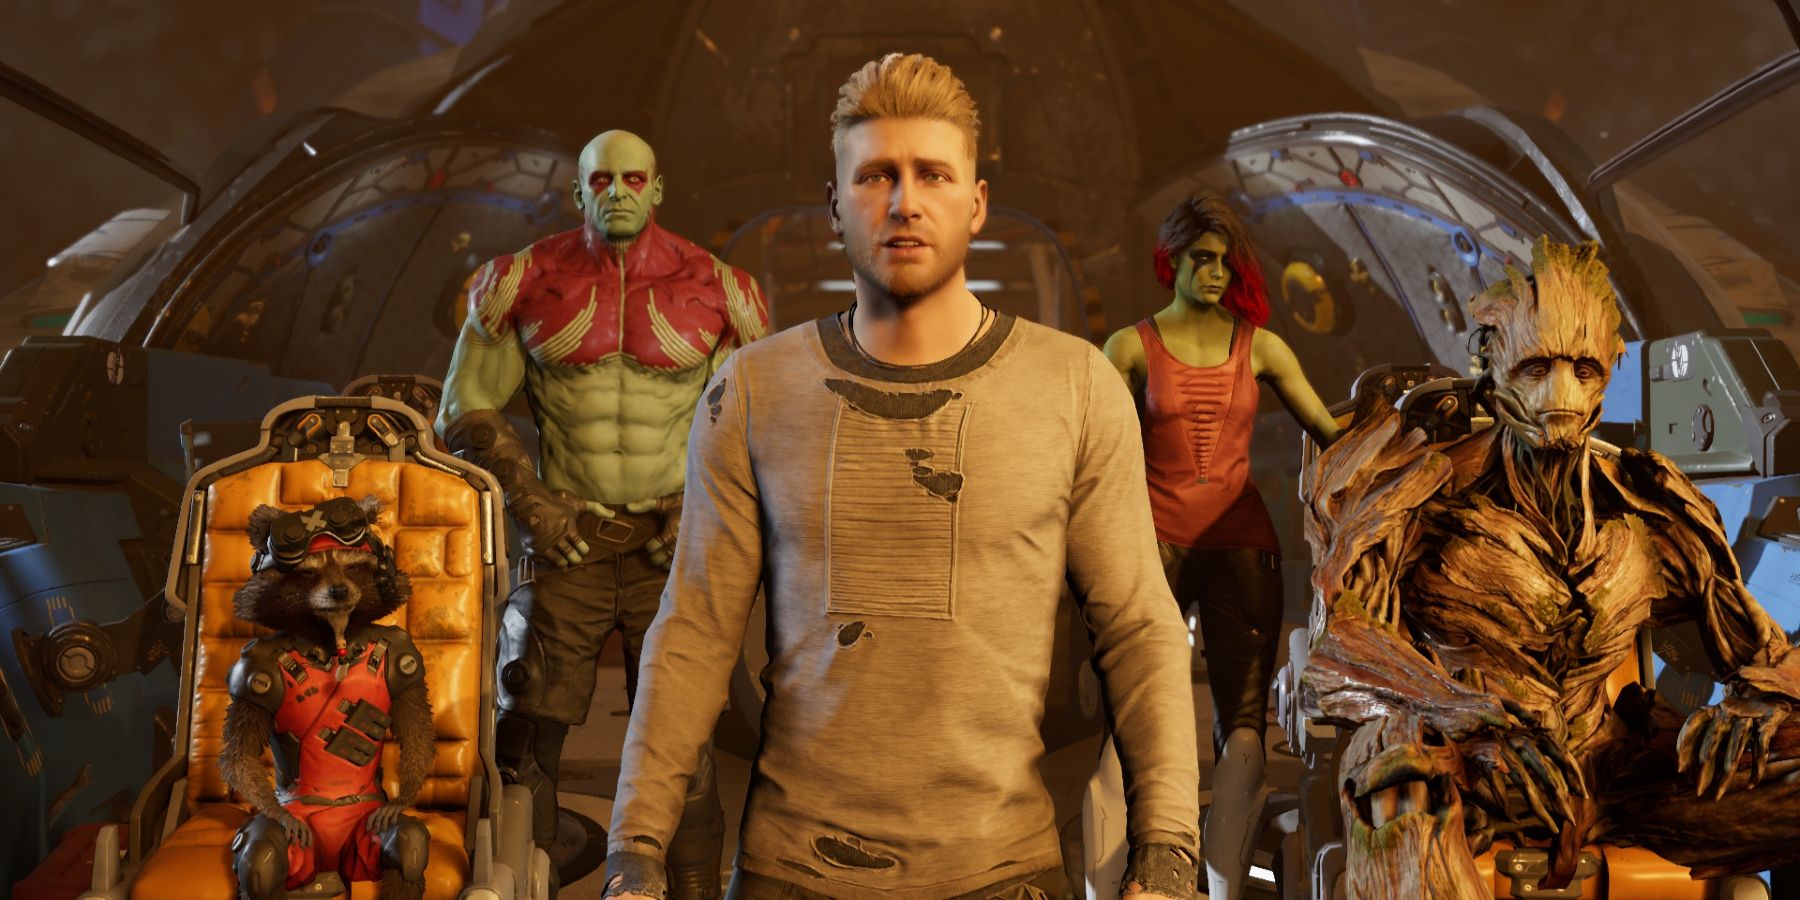 The Guardians gathered together on the bridge of the Milano in Marvel's Guardians Of The Galaxy